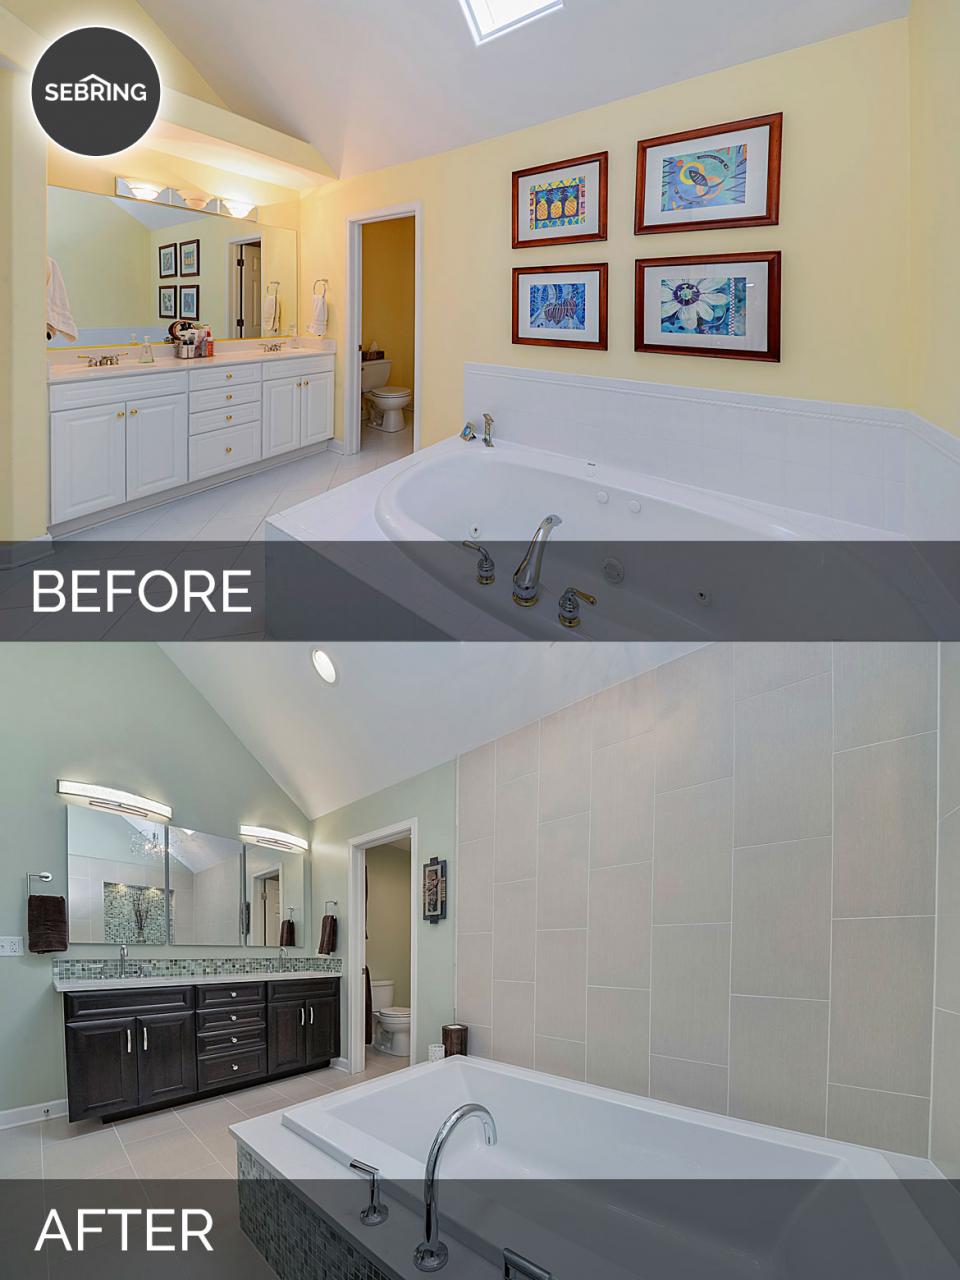 Steve & Nicolle's Master Bath Before & After Pictures Home Remodeling